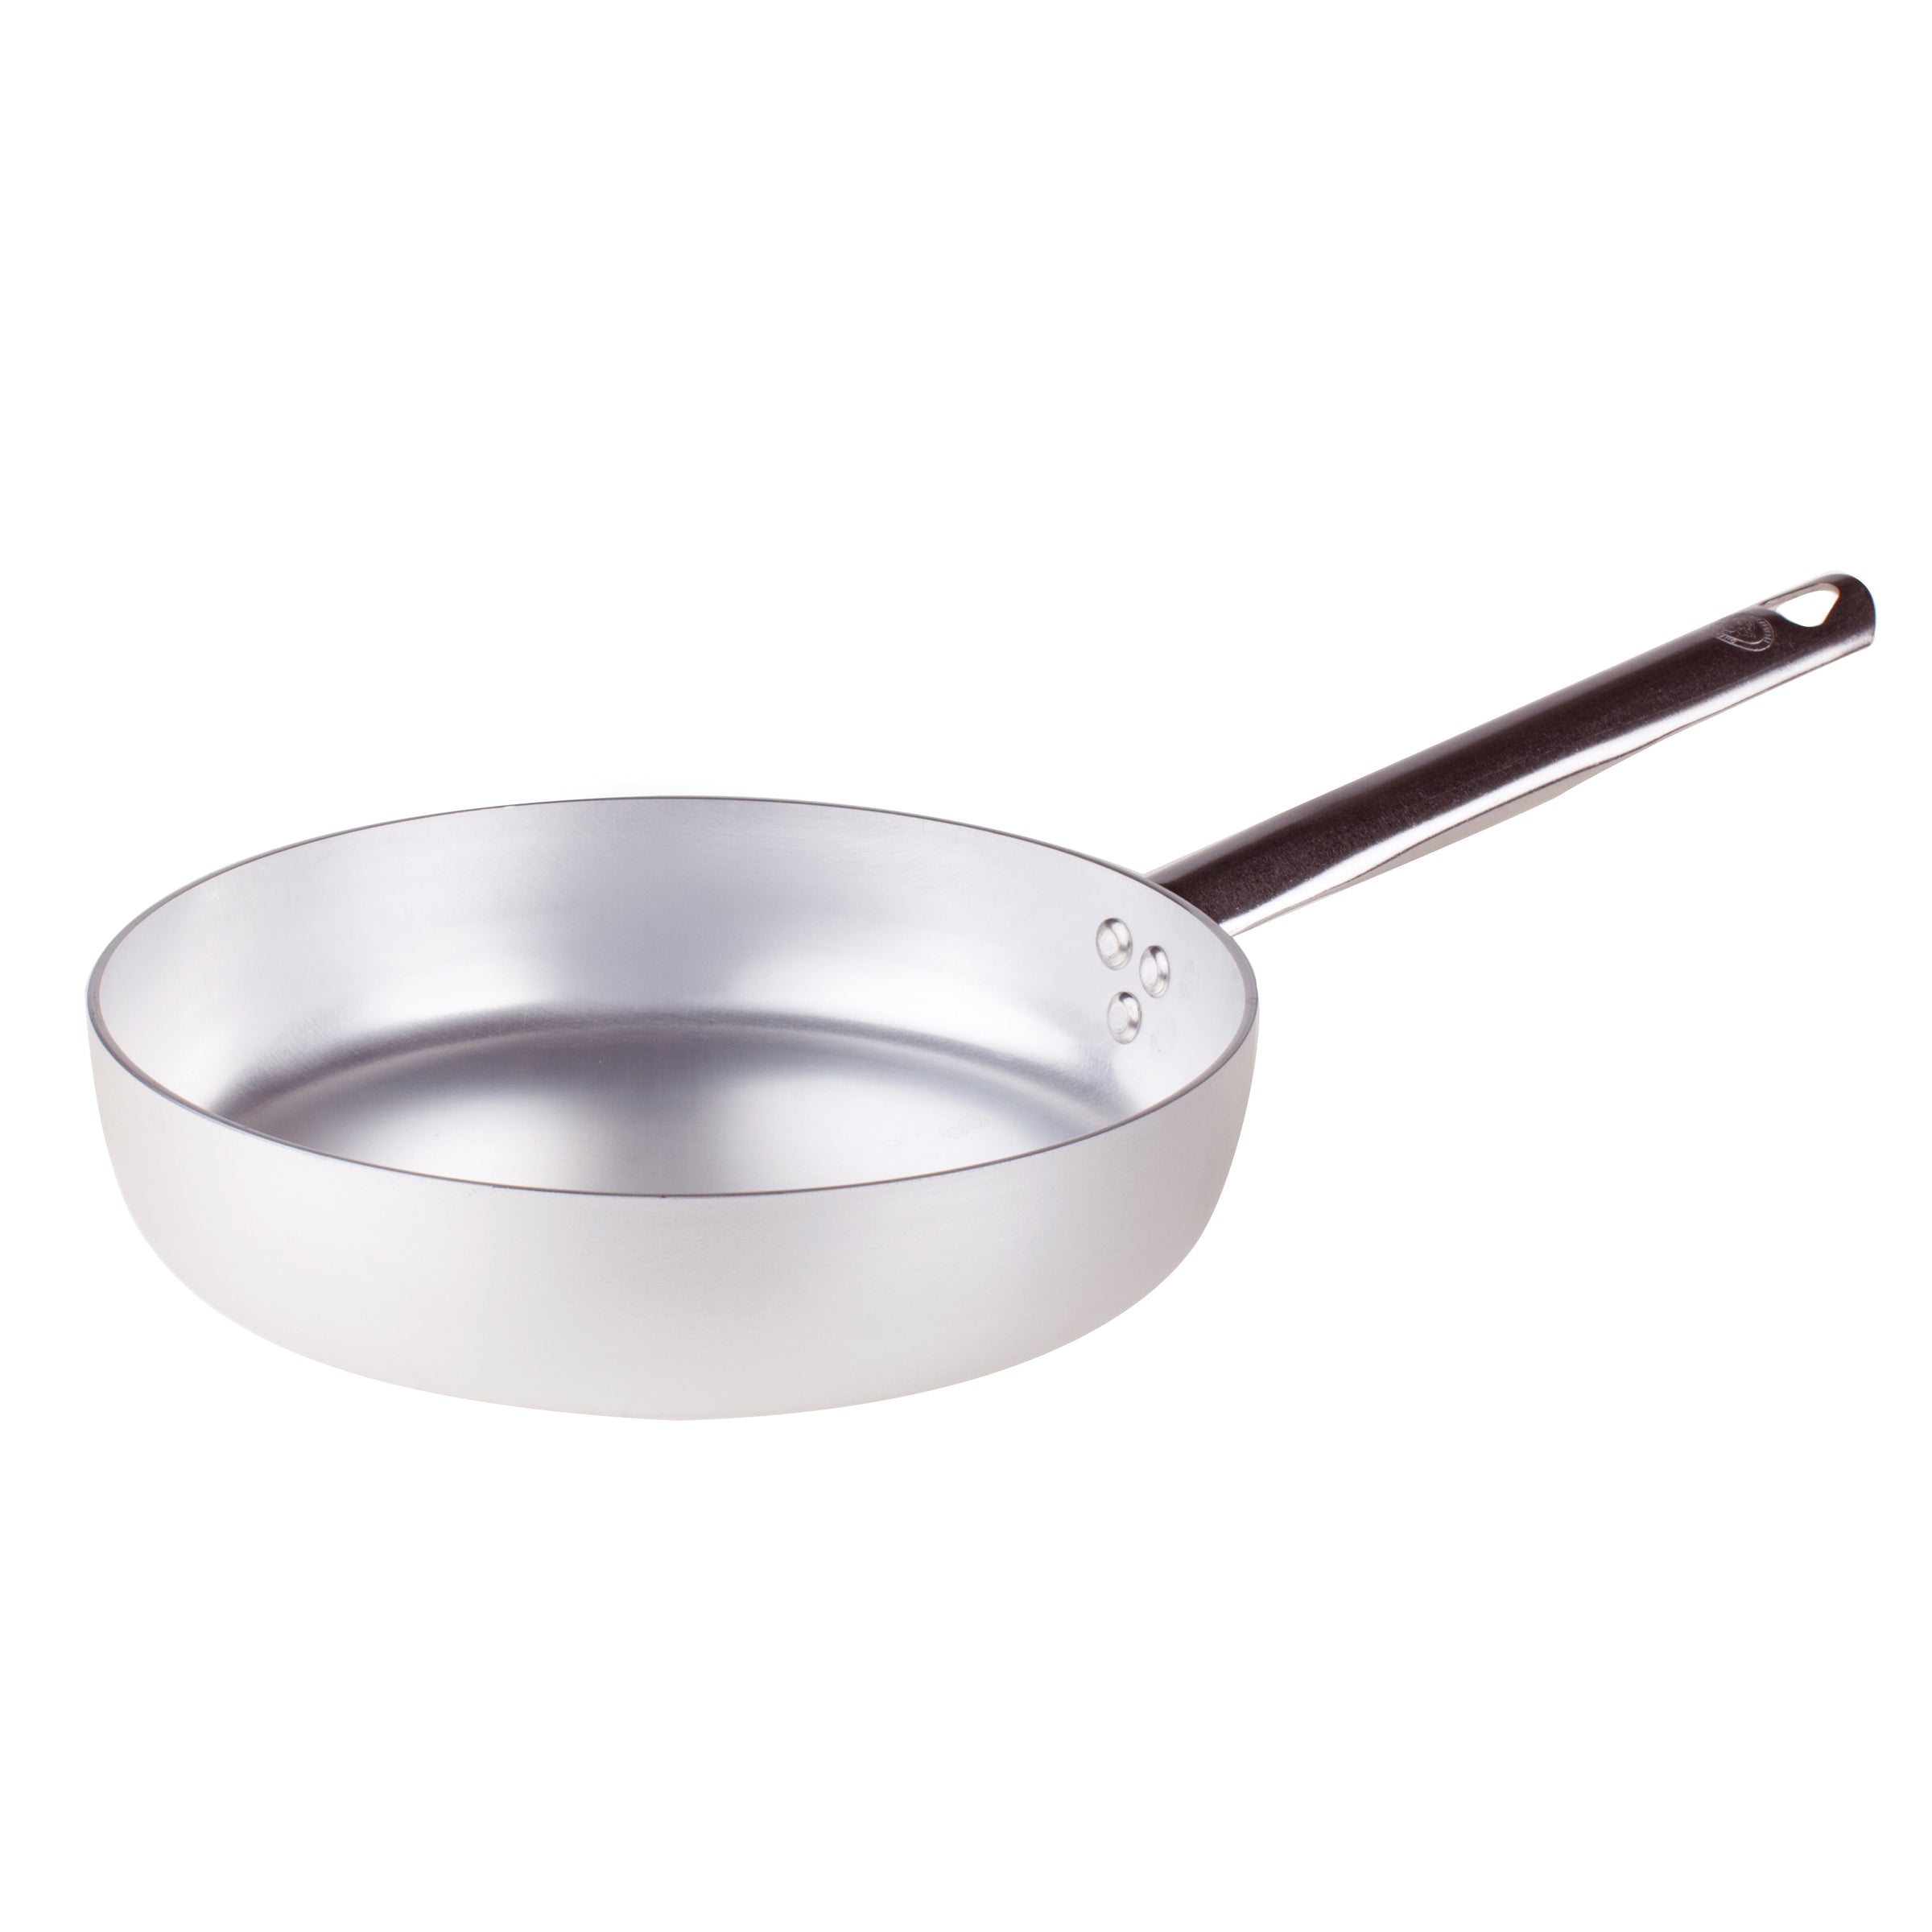 Agnelli Aluminum 5mm Deep Straight Fry Pan with Stainless Steel Rubber Handle, 7.8-Inches